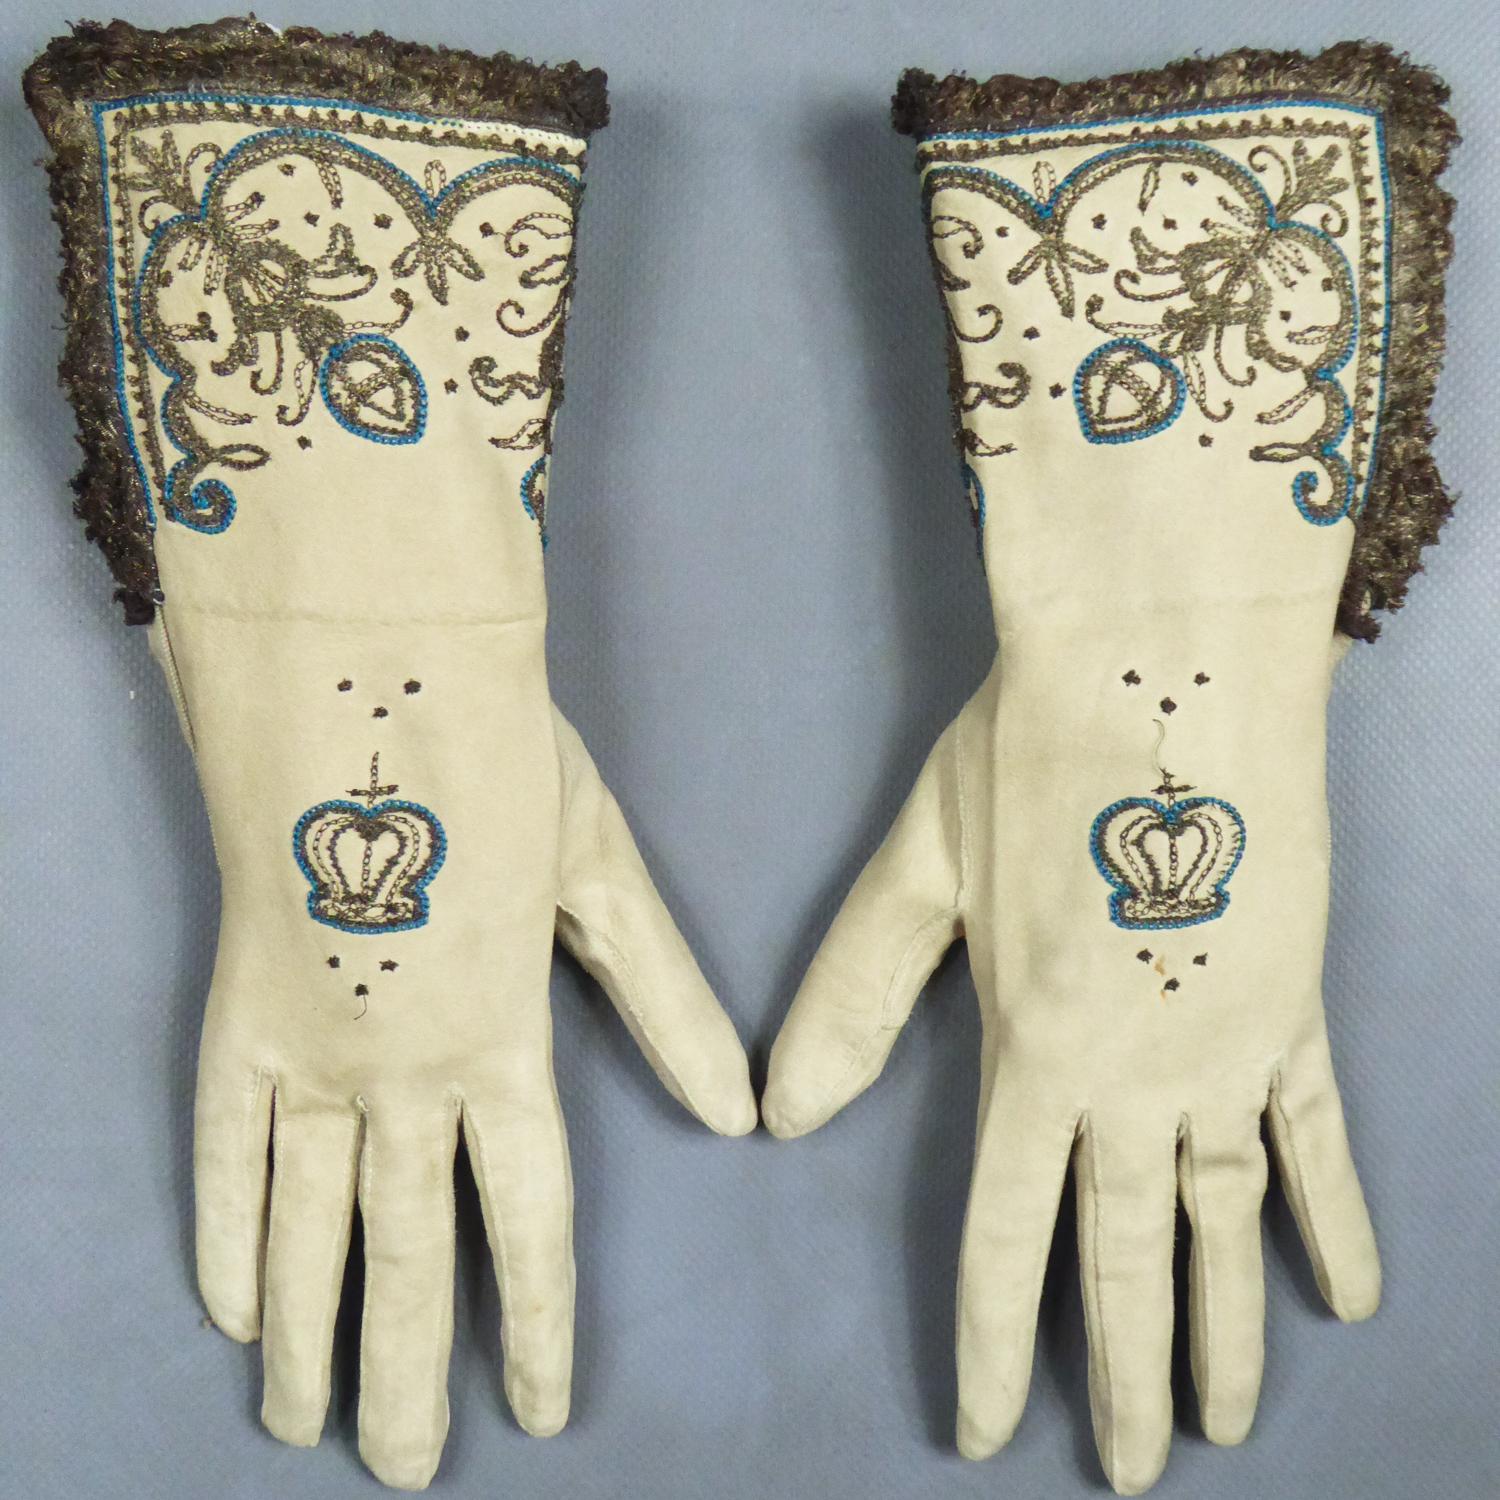 Late 19th century
England

Astonishing pair of bishop's gloves with the British crown dating from the end of the 19th century. In 17th century style, this pair of cream suede gloves embroidered in chain stitch with golden and silver metallic